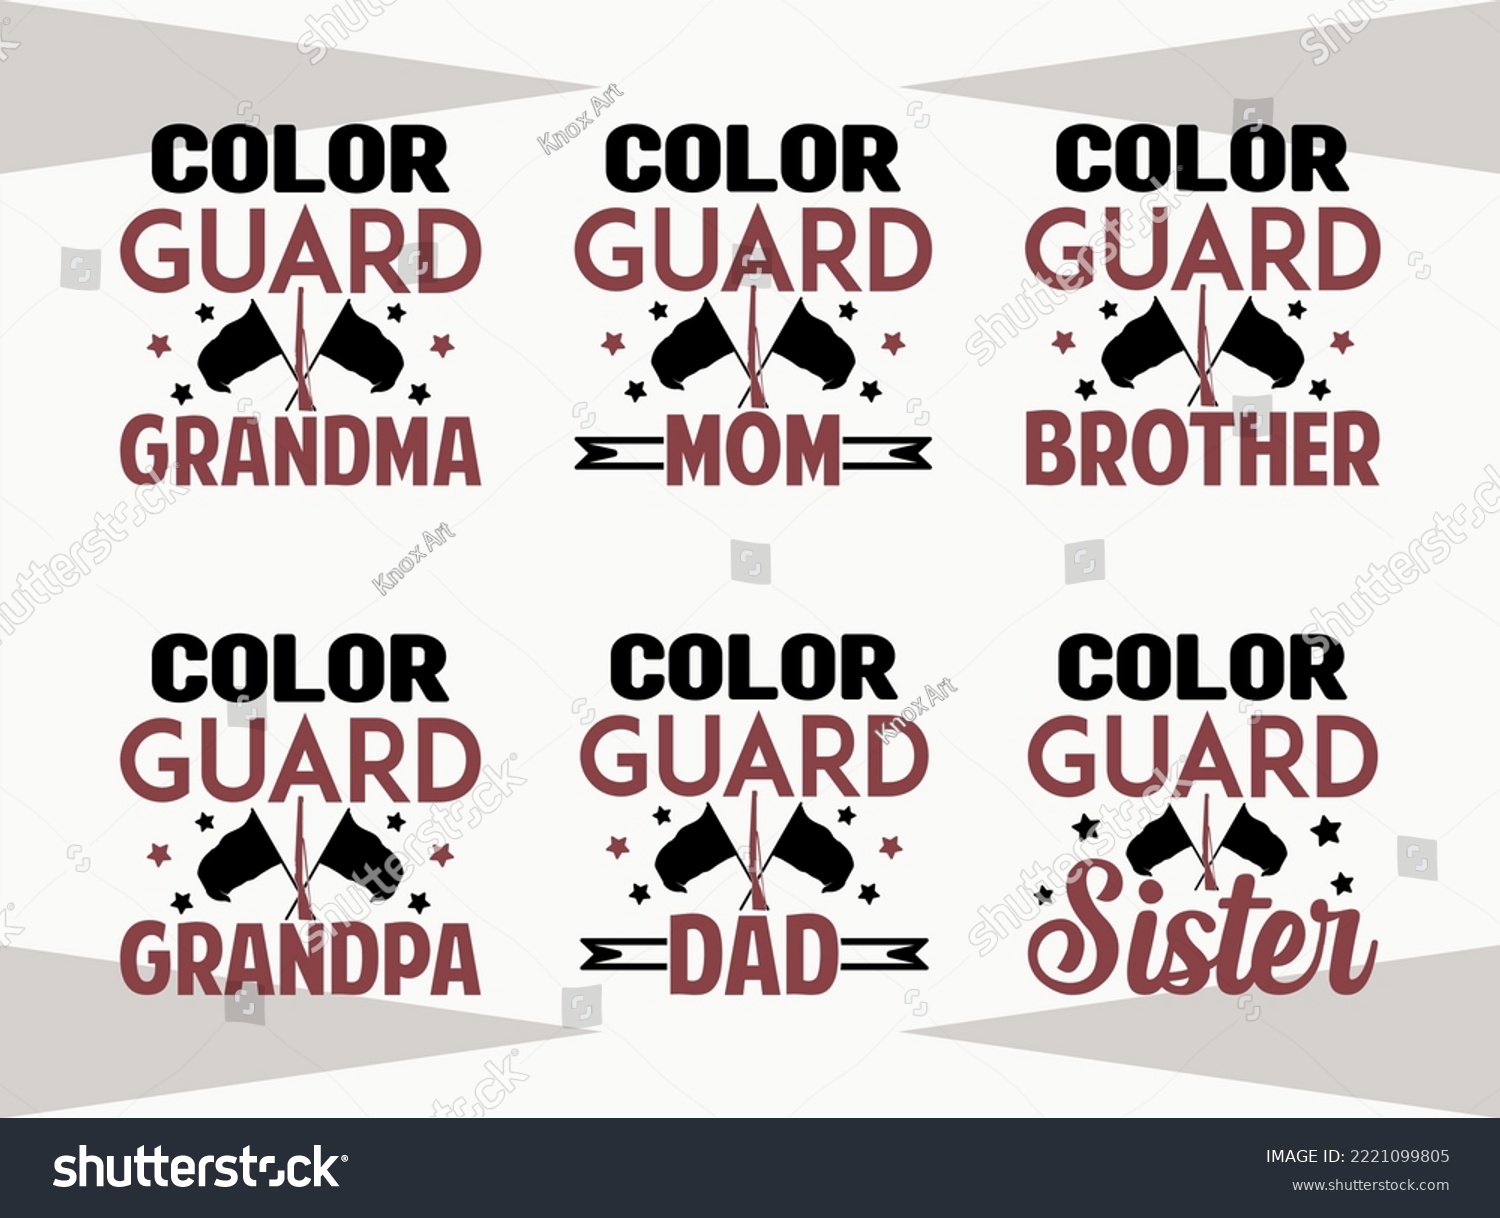 SVG of Color Guard Cut File, Color Guard Squad, Guard Mom, Color Guard Is My Favorite Season, Act Like A Beauty And Toss Like A Beast, My Daughter Does That Flag Flippy Thing svg